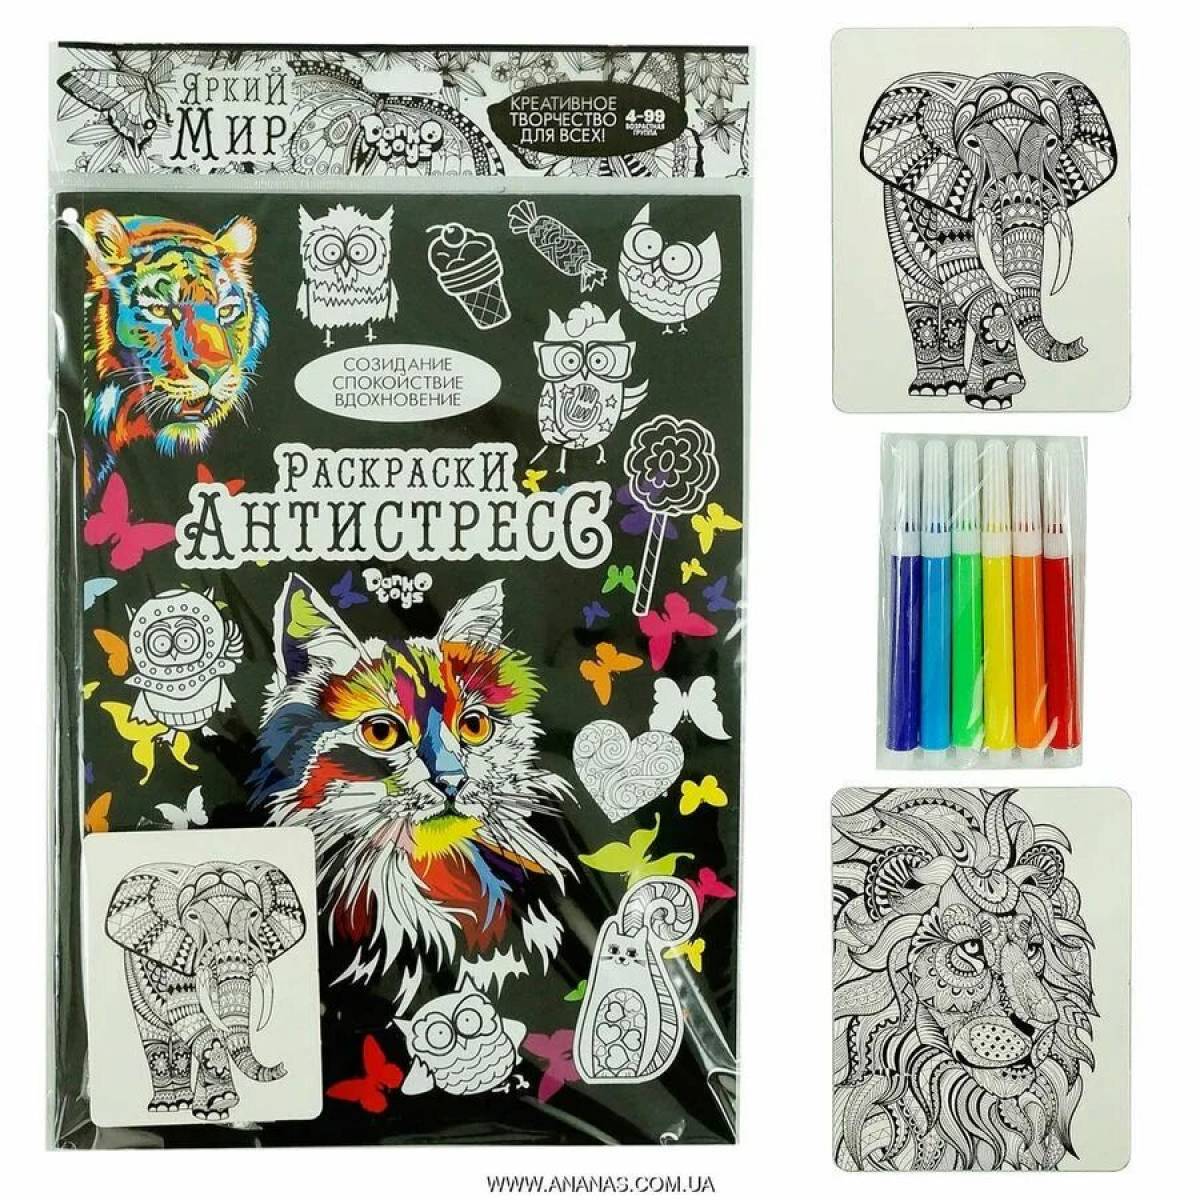 Attractive anti-stress coloring book for markers